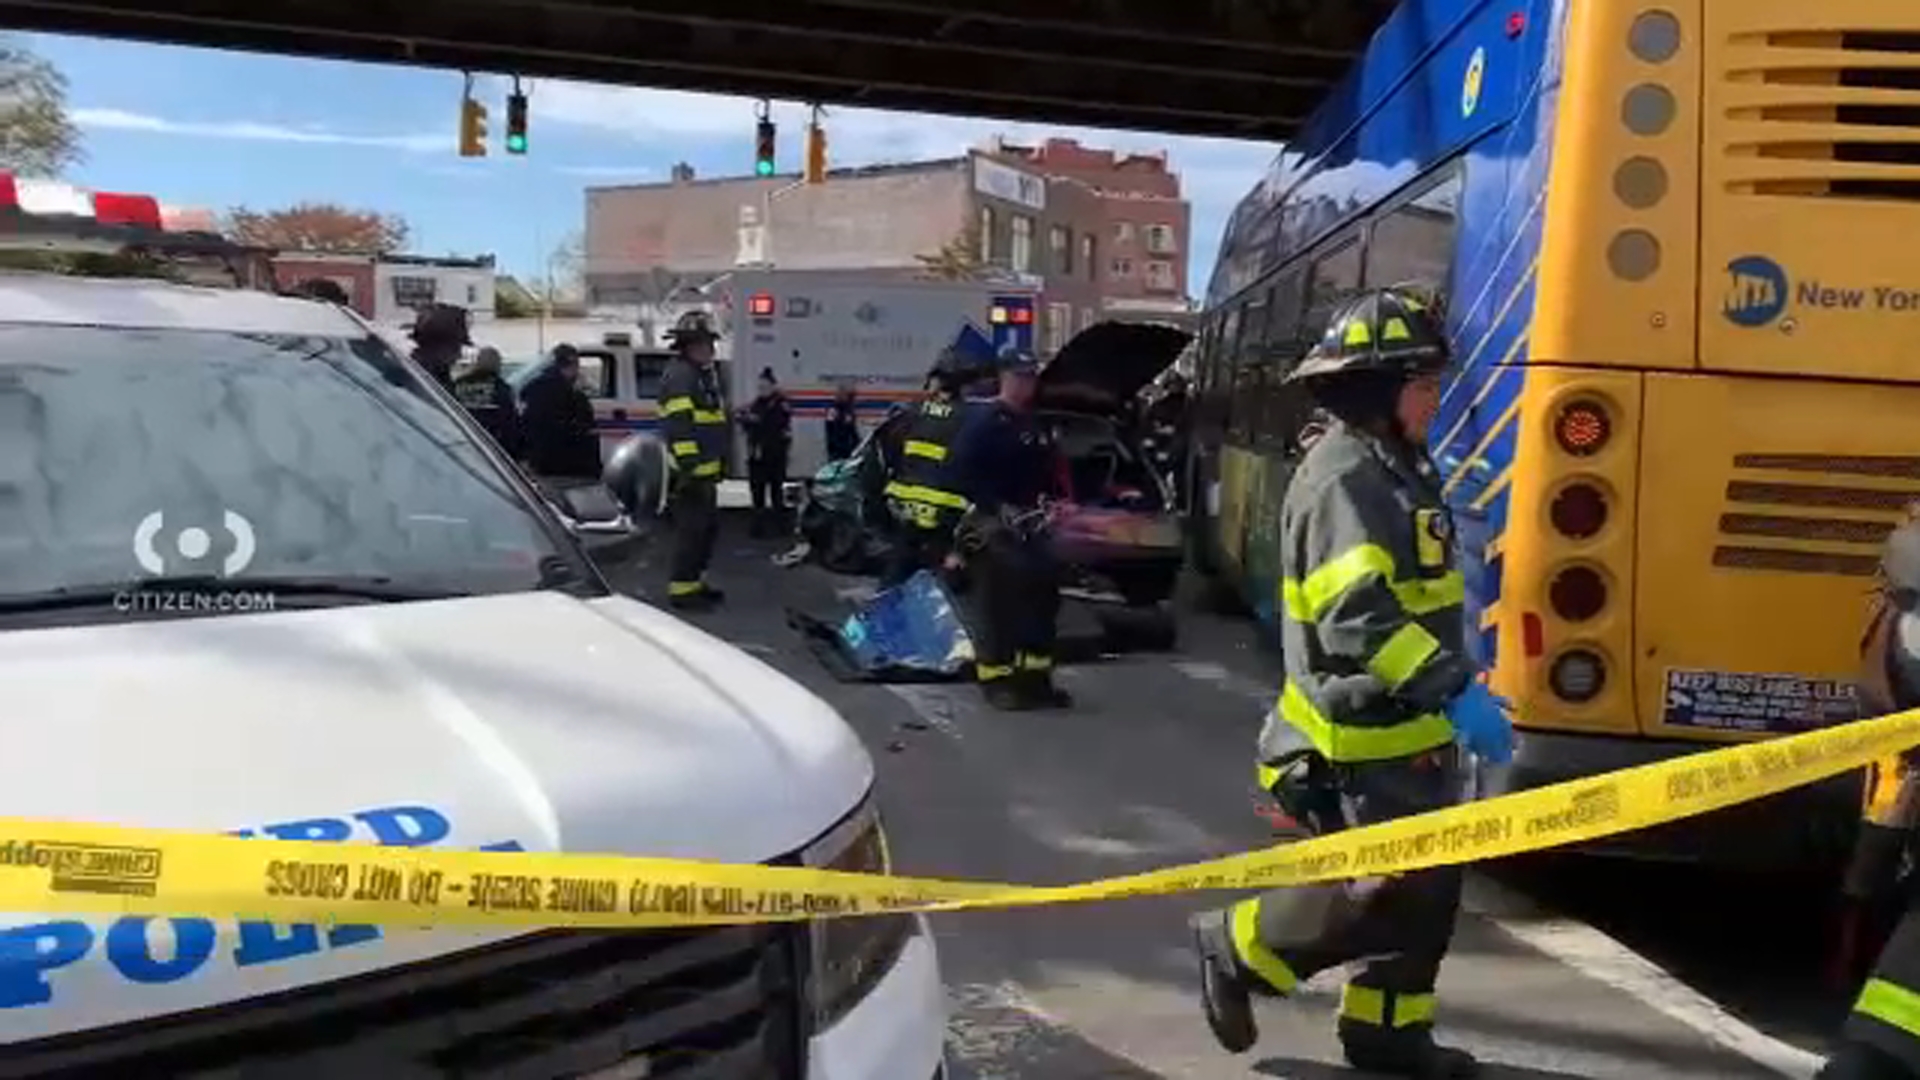 At least 7 injured after car, 2 buses involved in crash in Midwood